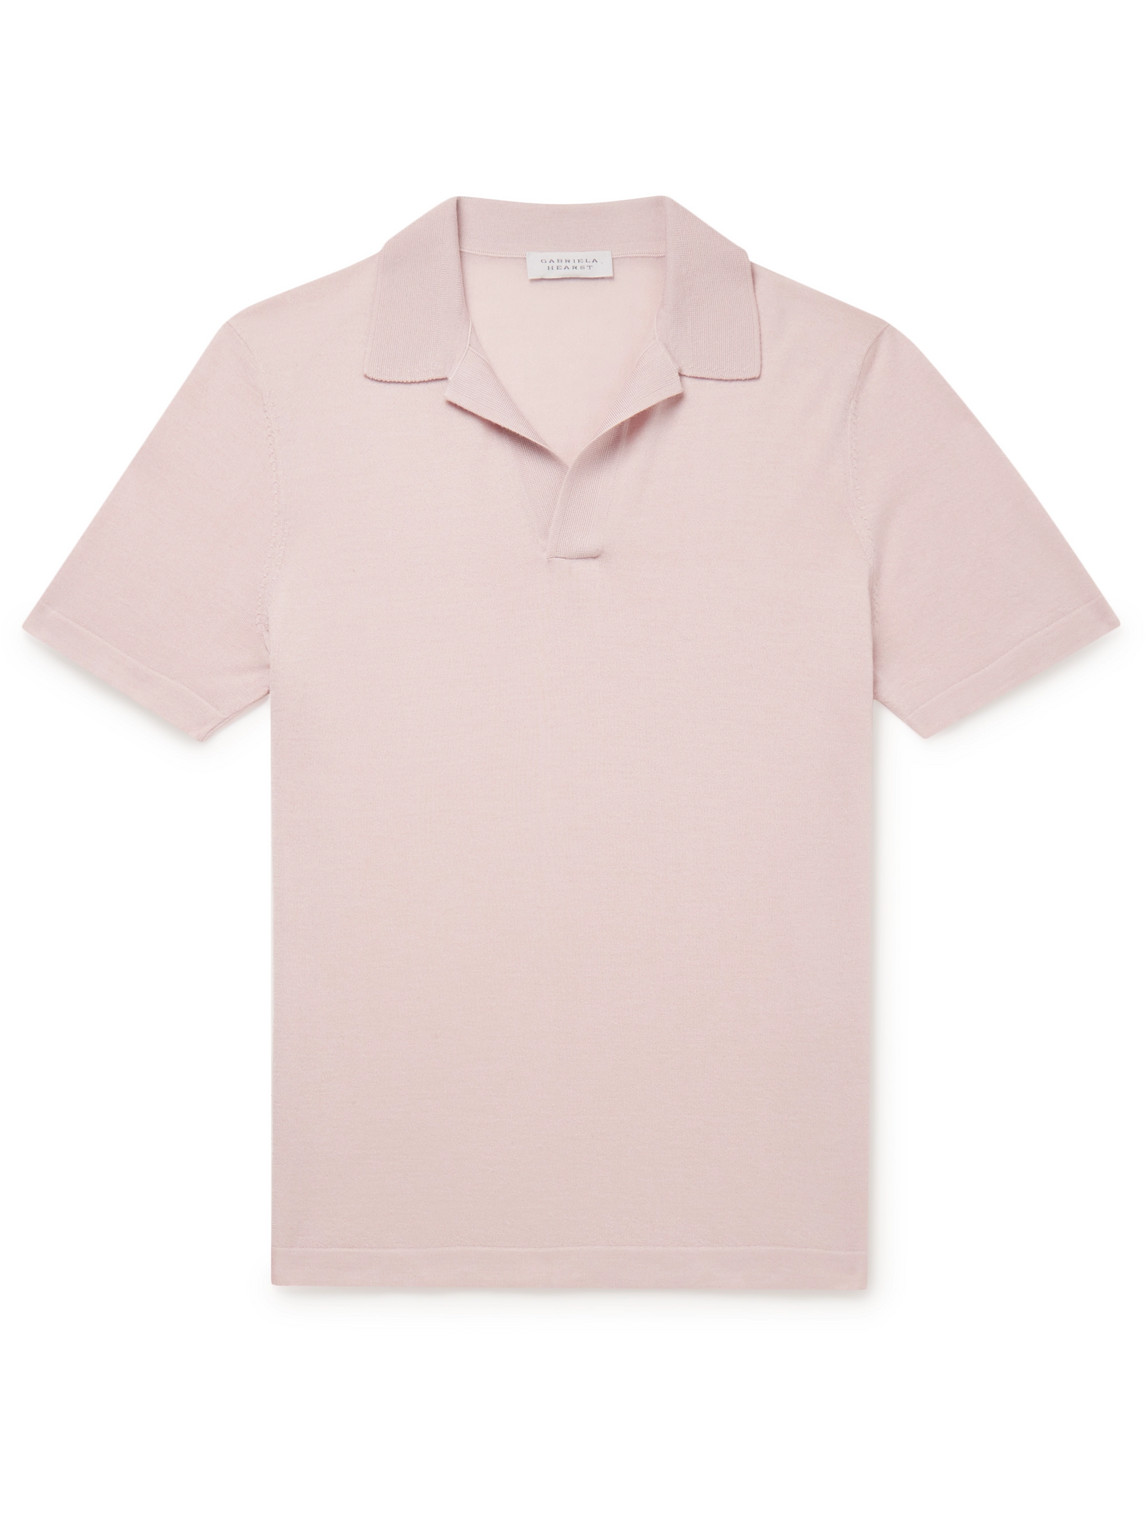 Gabriela Hearst Stendhal Cashmere Polo Shirt In Pink